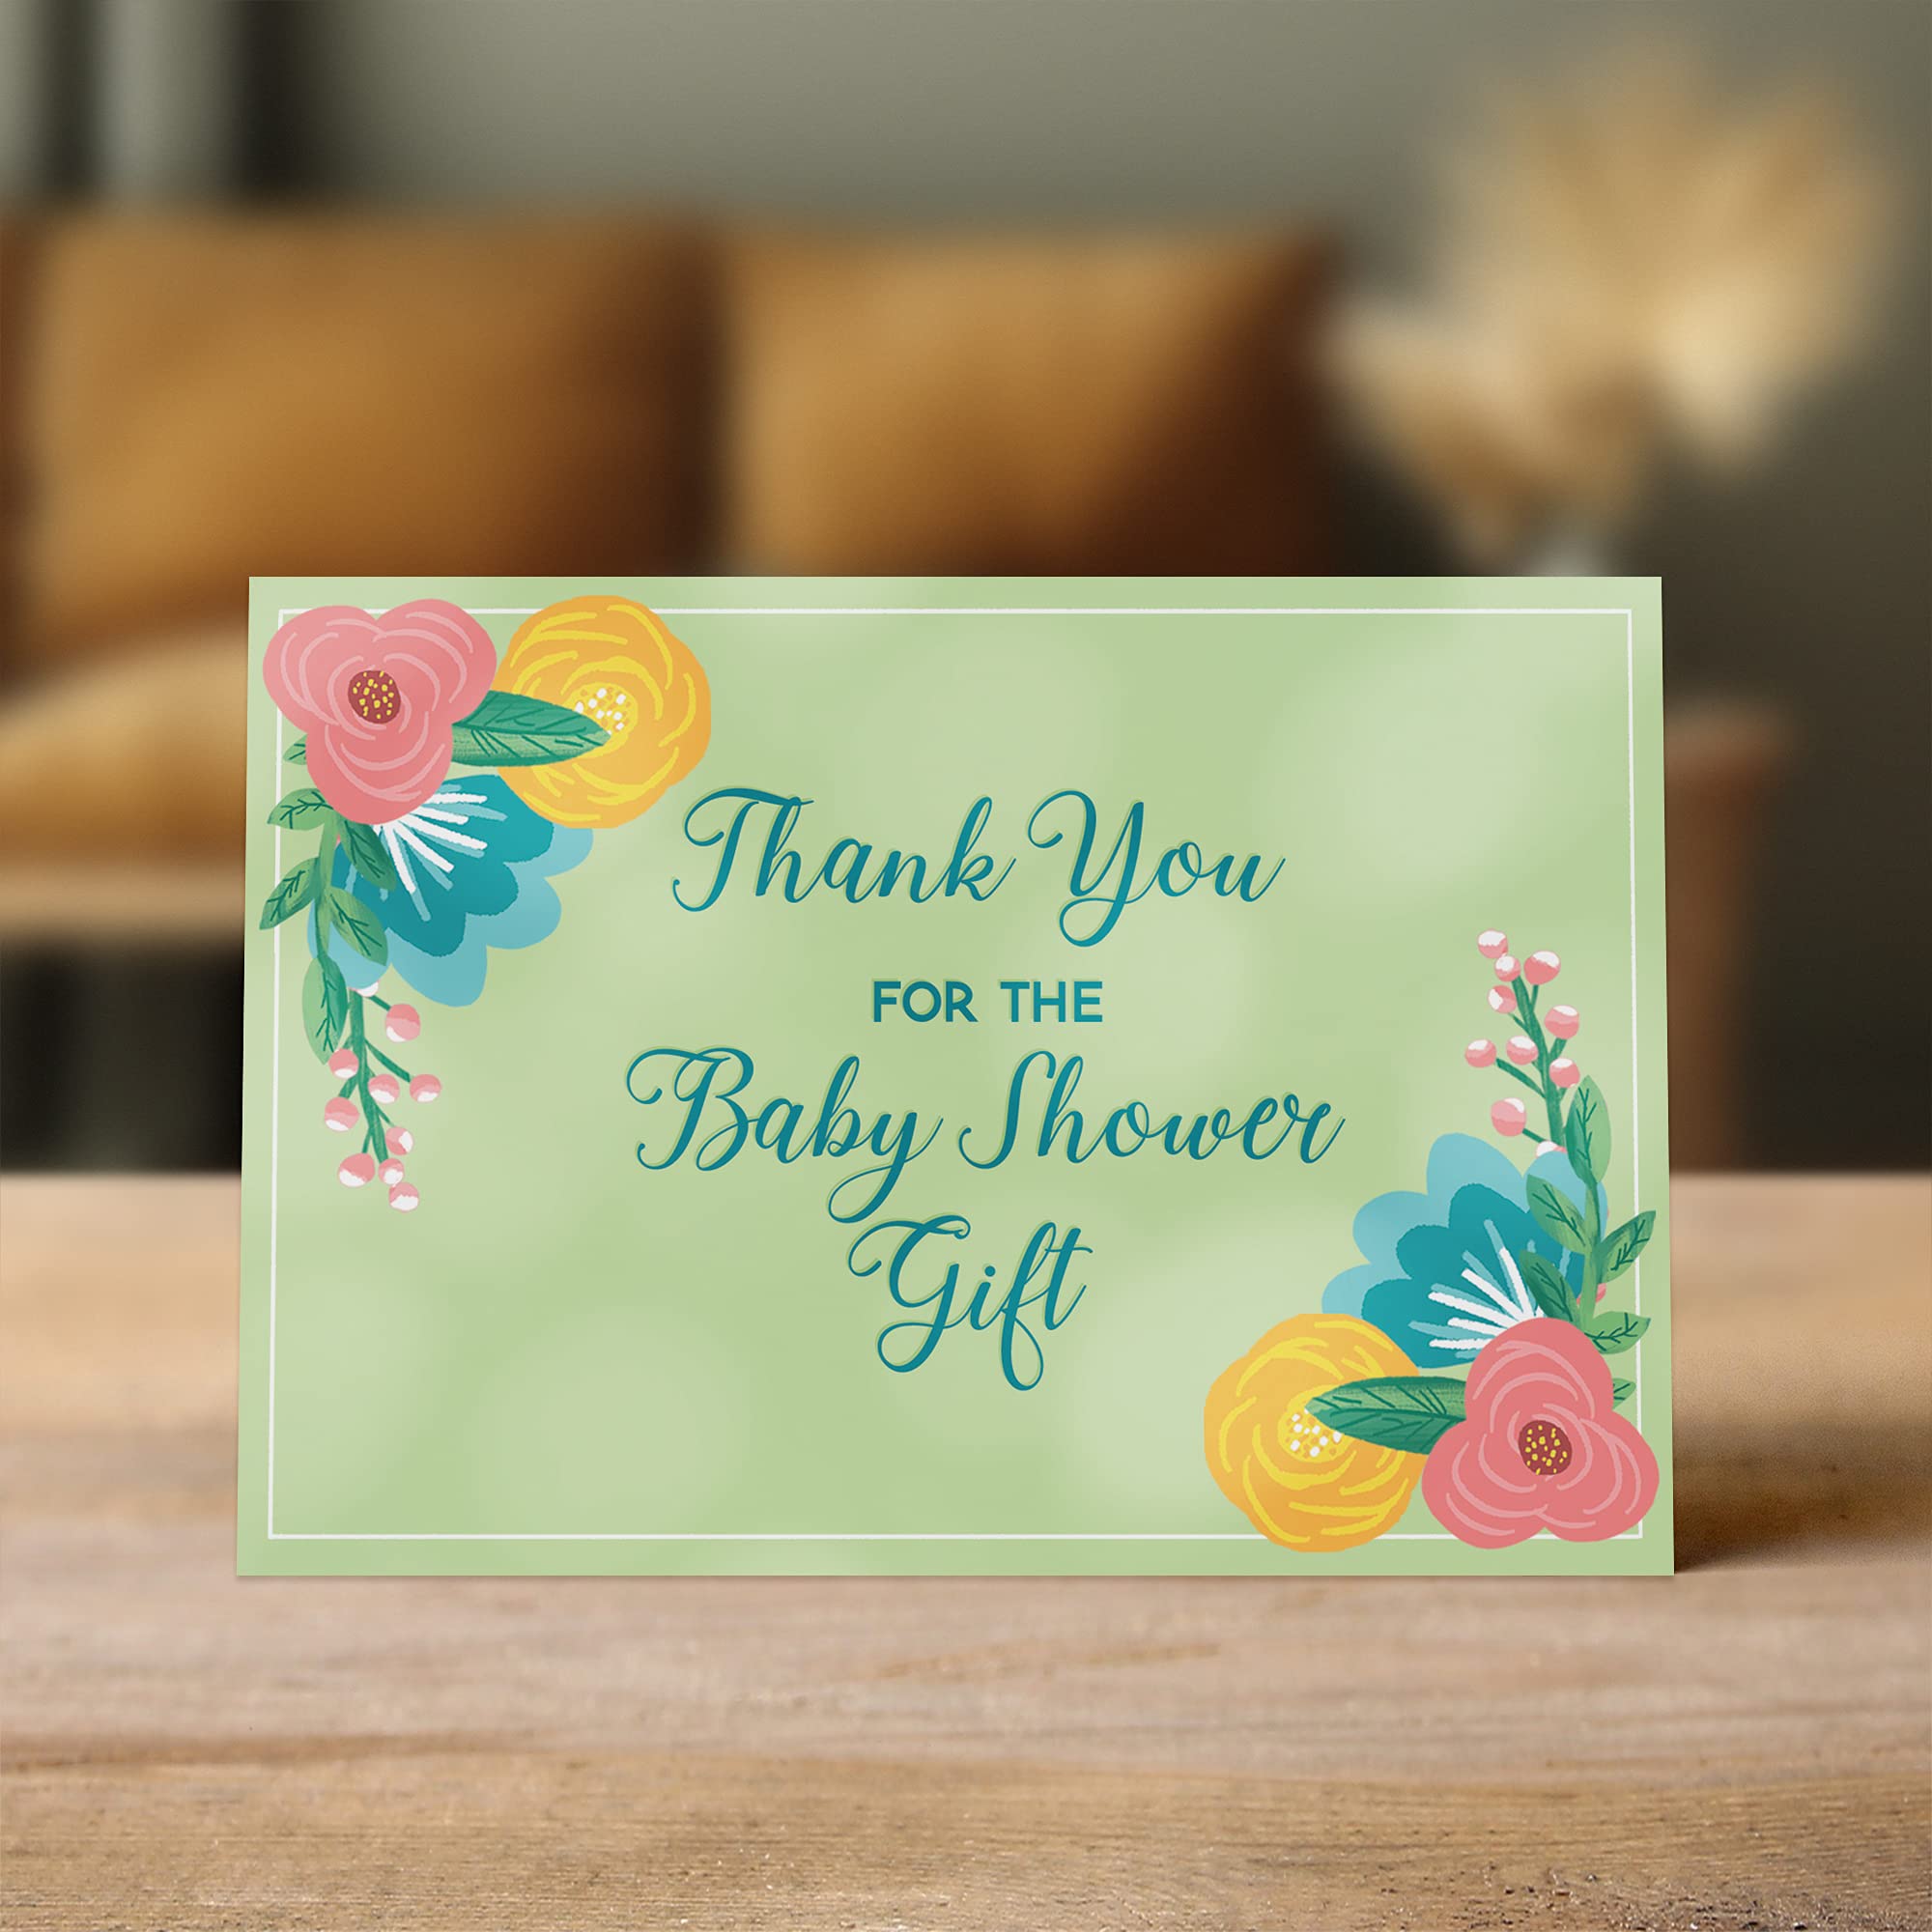 Designer Greetings Thank You Cards, Gender Neutral (8 Thank-You Notes and Envelopes for Baby Shower - Baby Boy or Baby Girl)